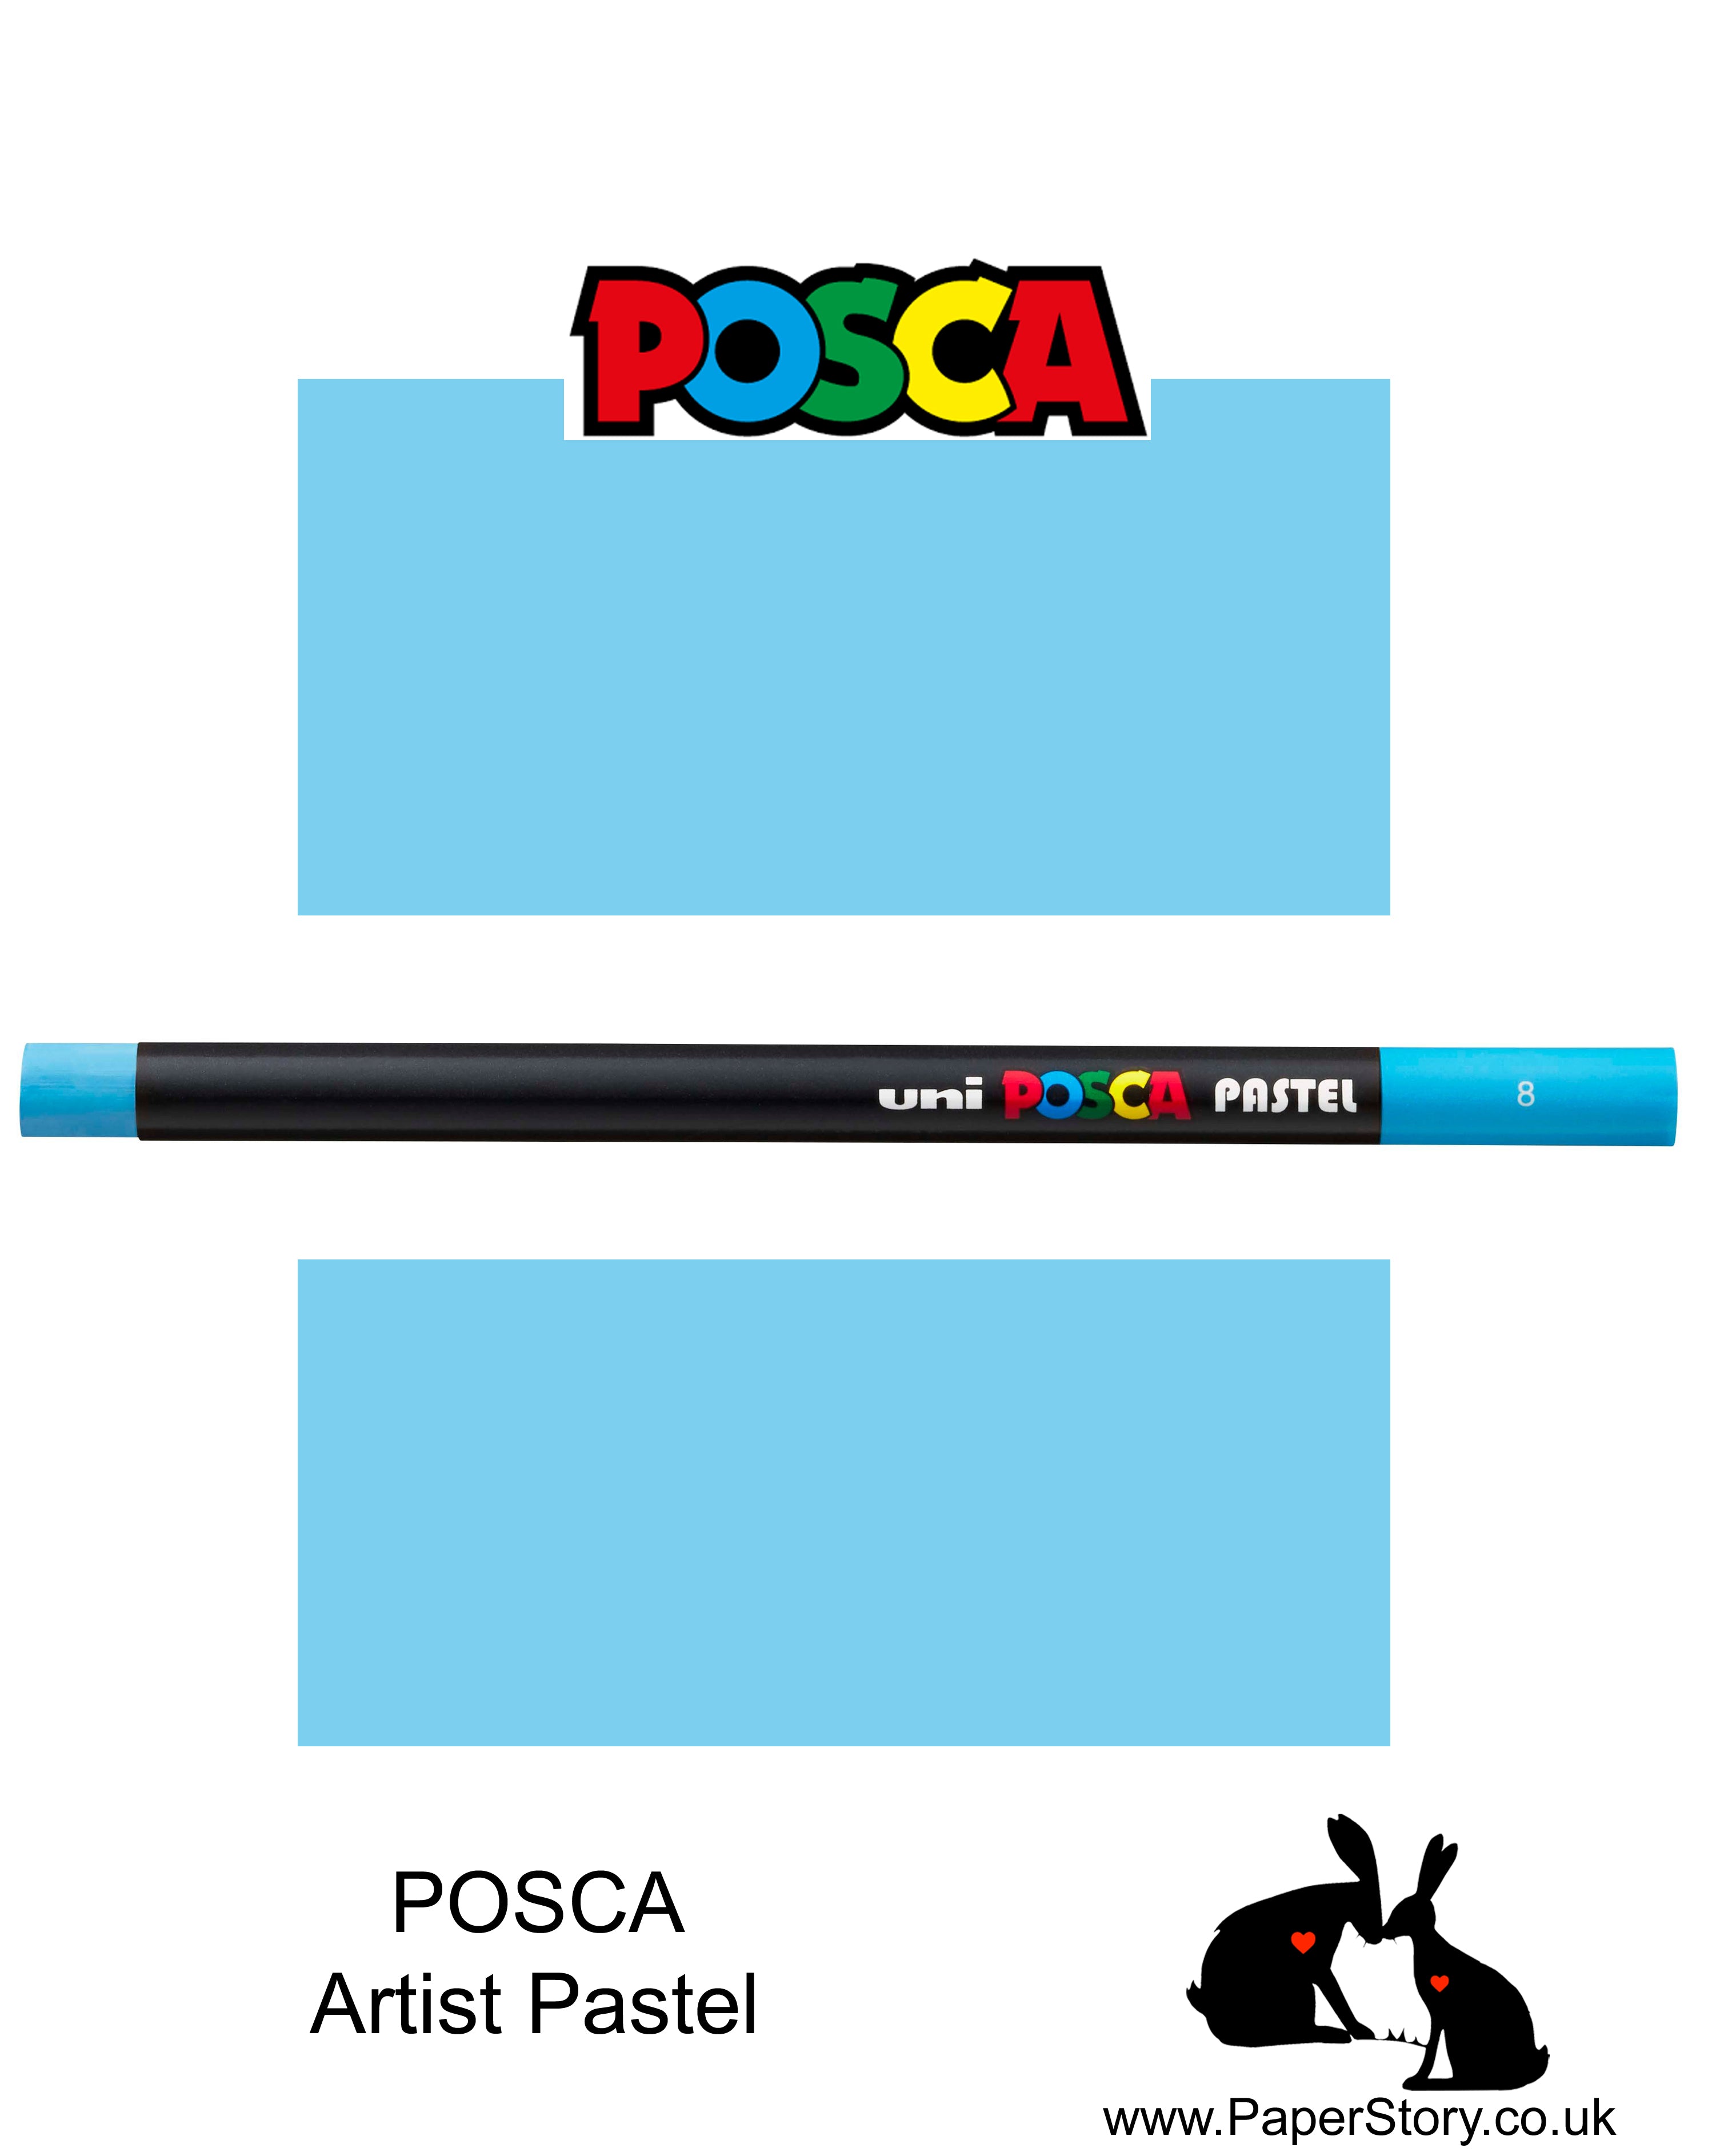 New Uni POSCA Pastels, Light Blue colour, these  new style wax and oil mixed pastel colours can be blended and overlaid, you can stipple, colour block, cross-hatch, scratch and outline. You can heat the sticks to create textured effects.